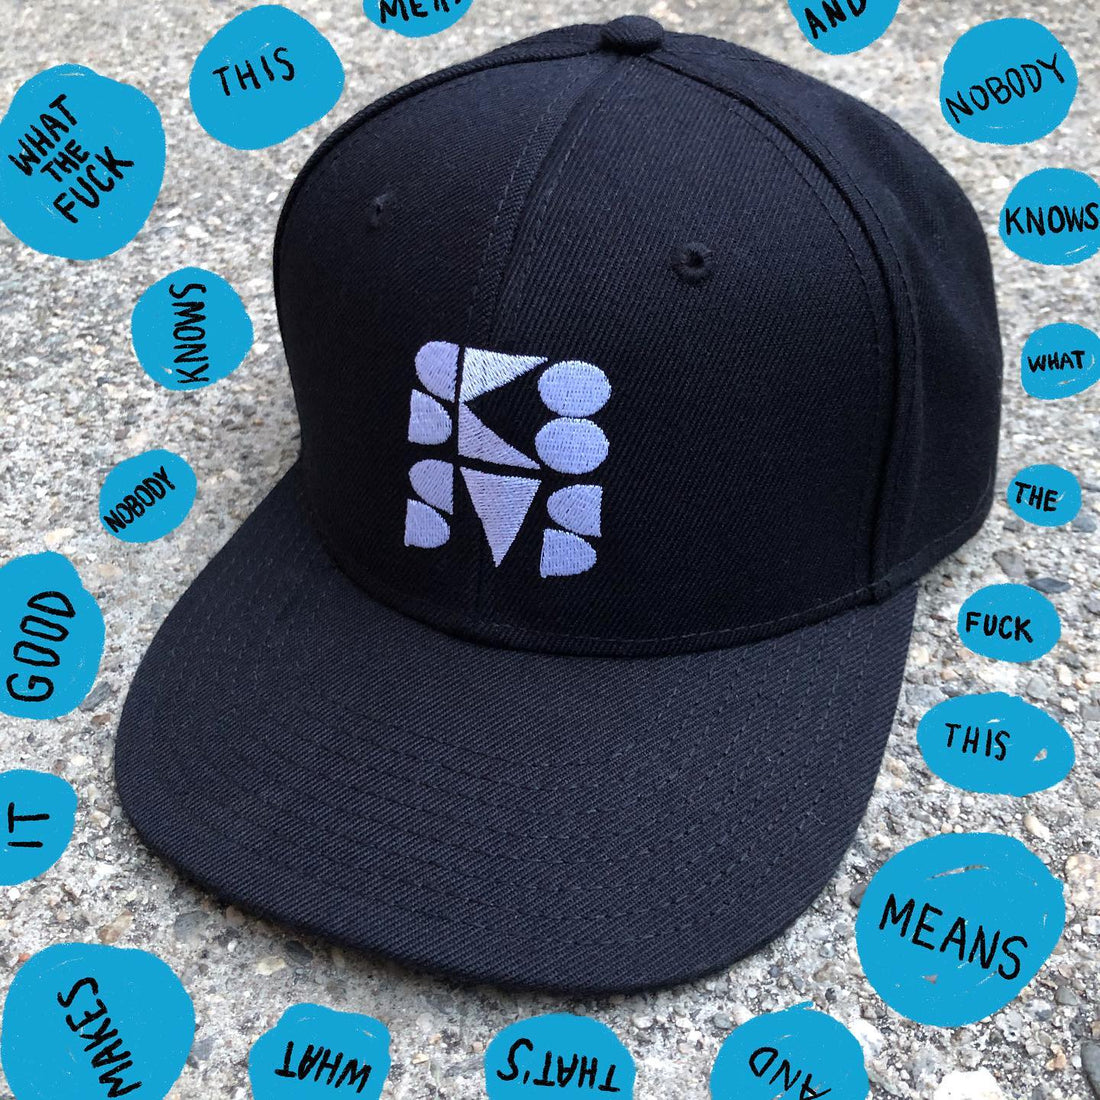 Hats are back at <a...